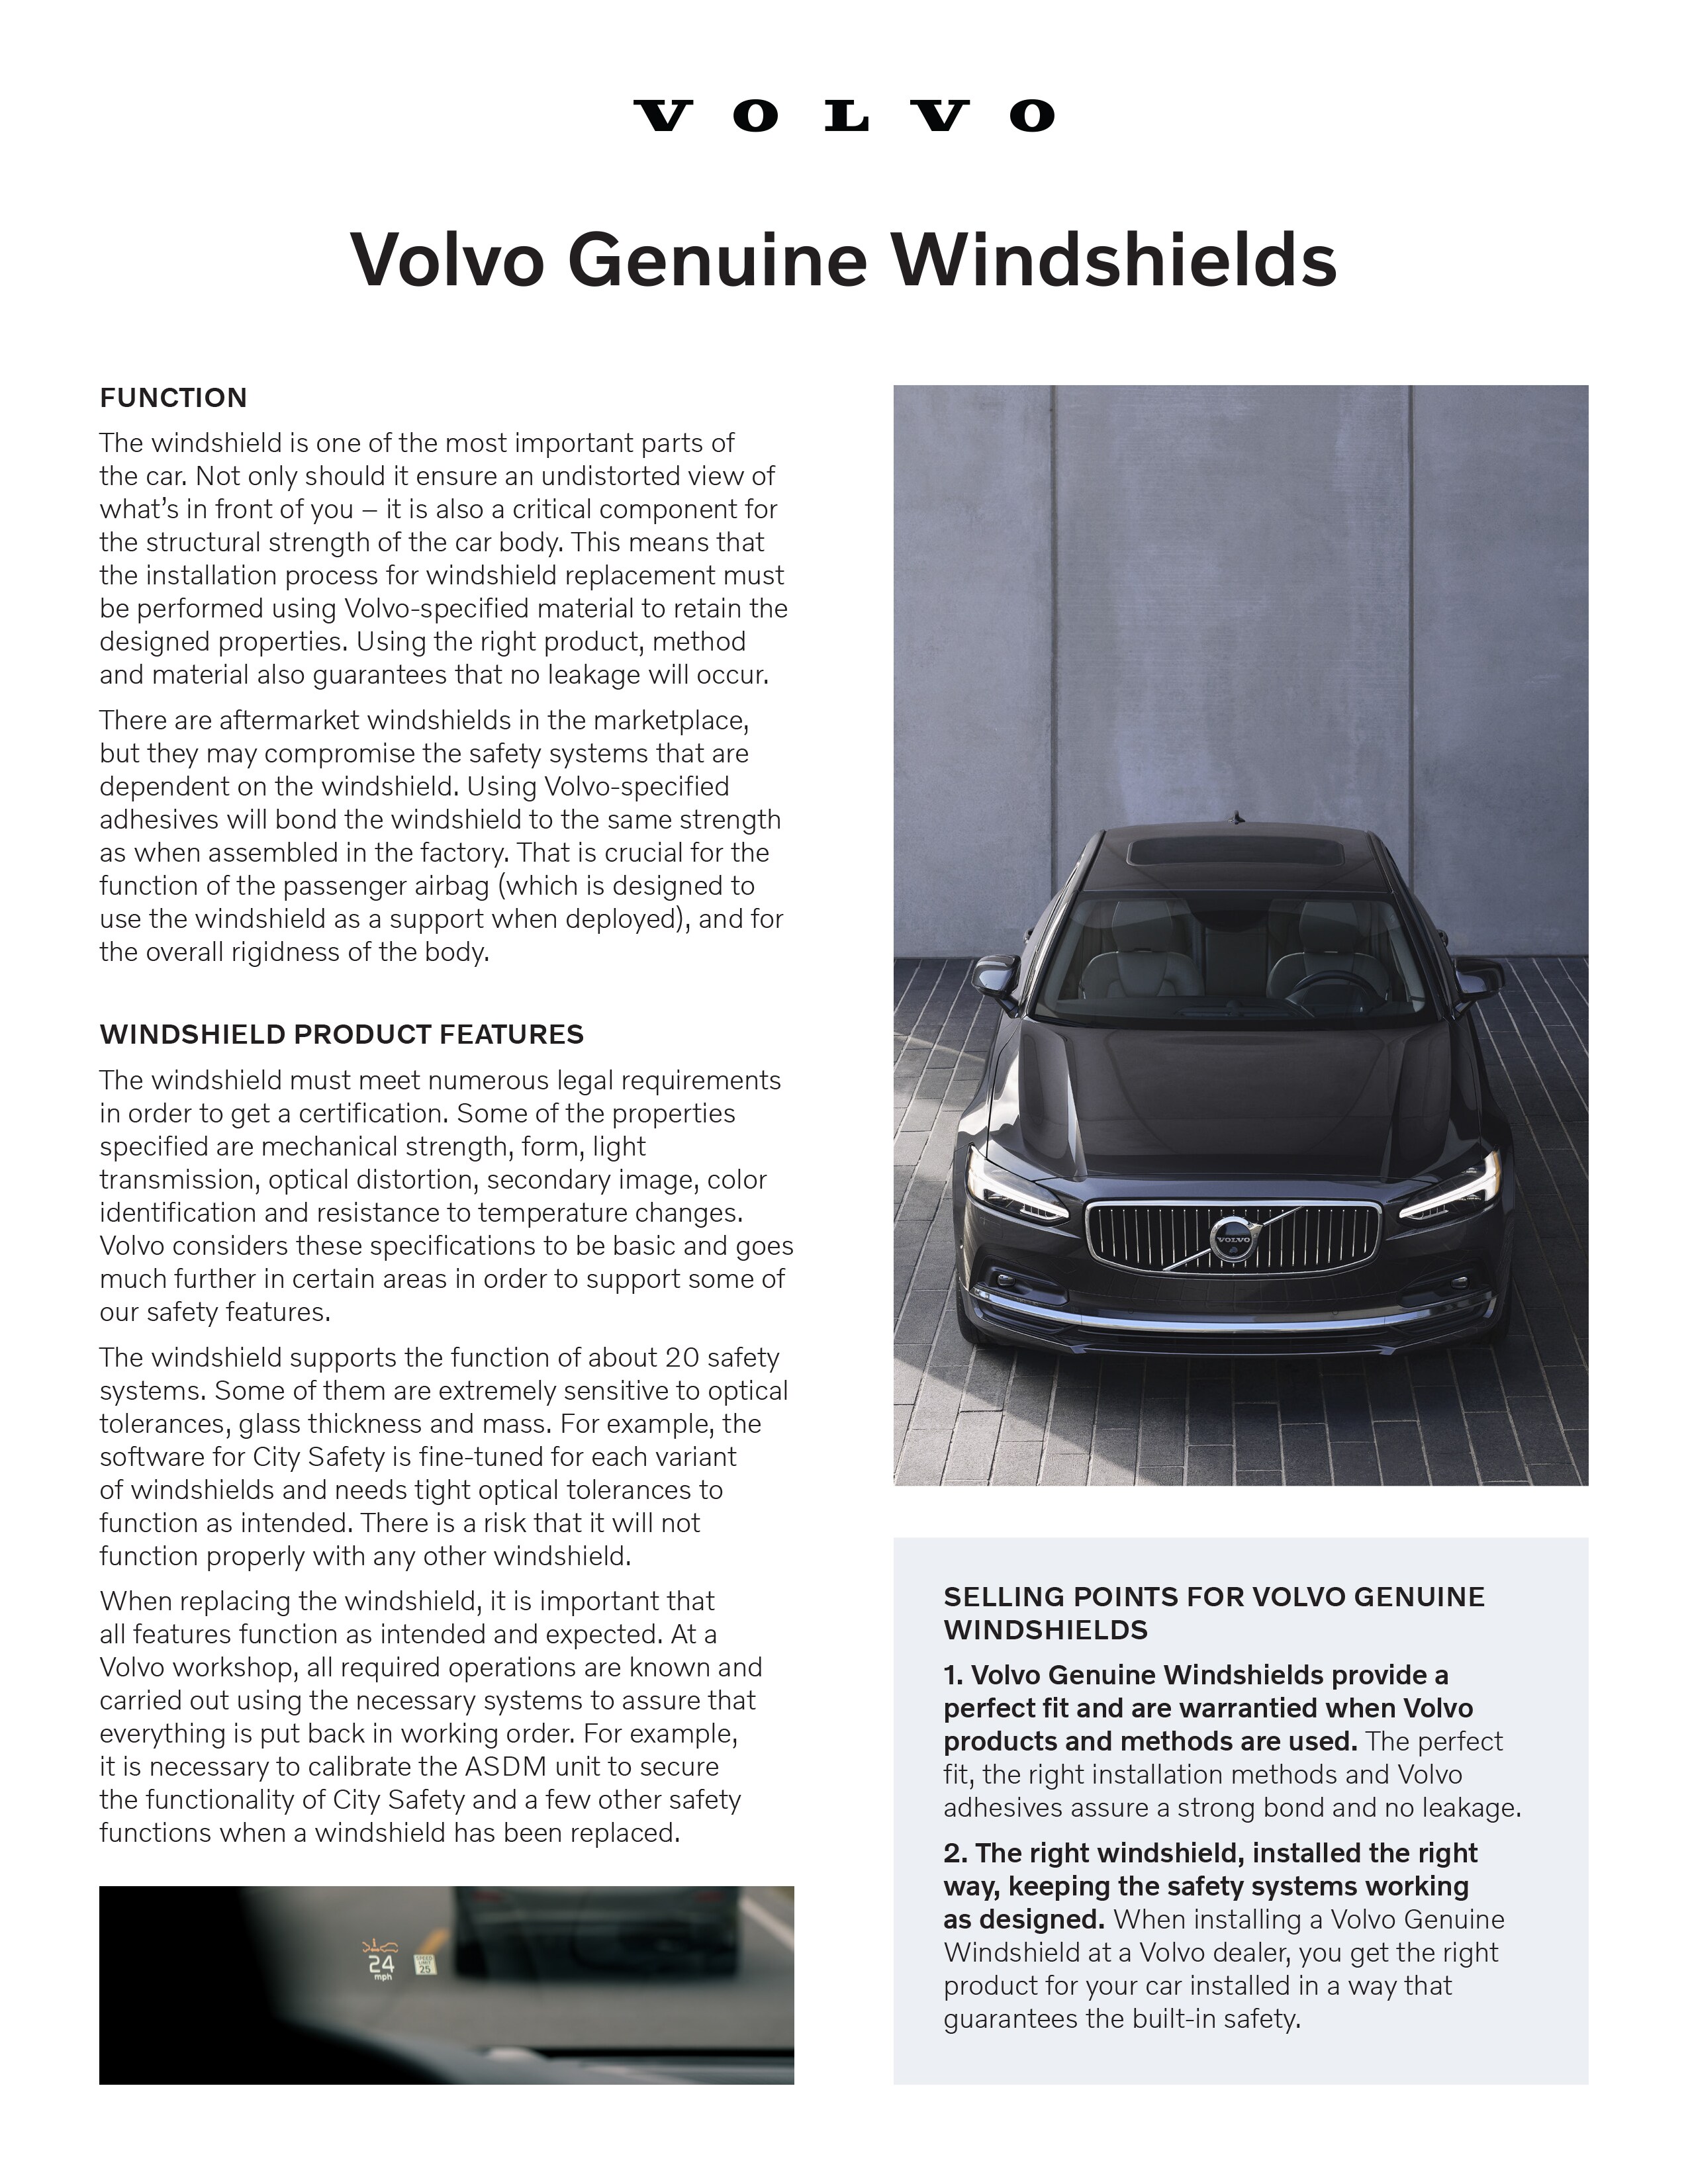 Research Volvo Genuine Windshields at Culver City Volvo Cars